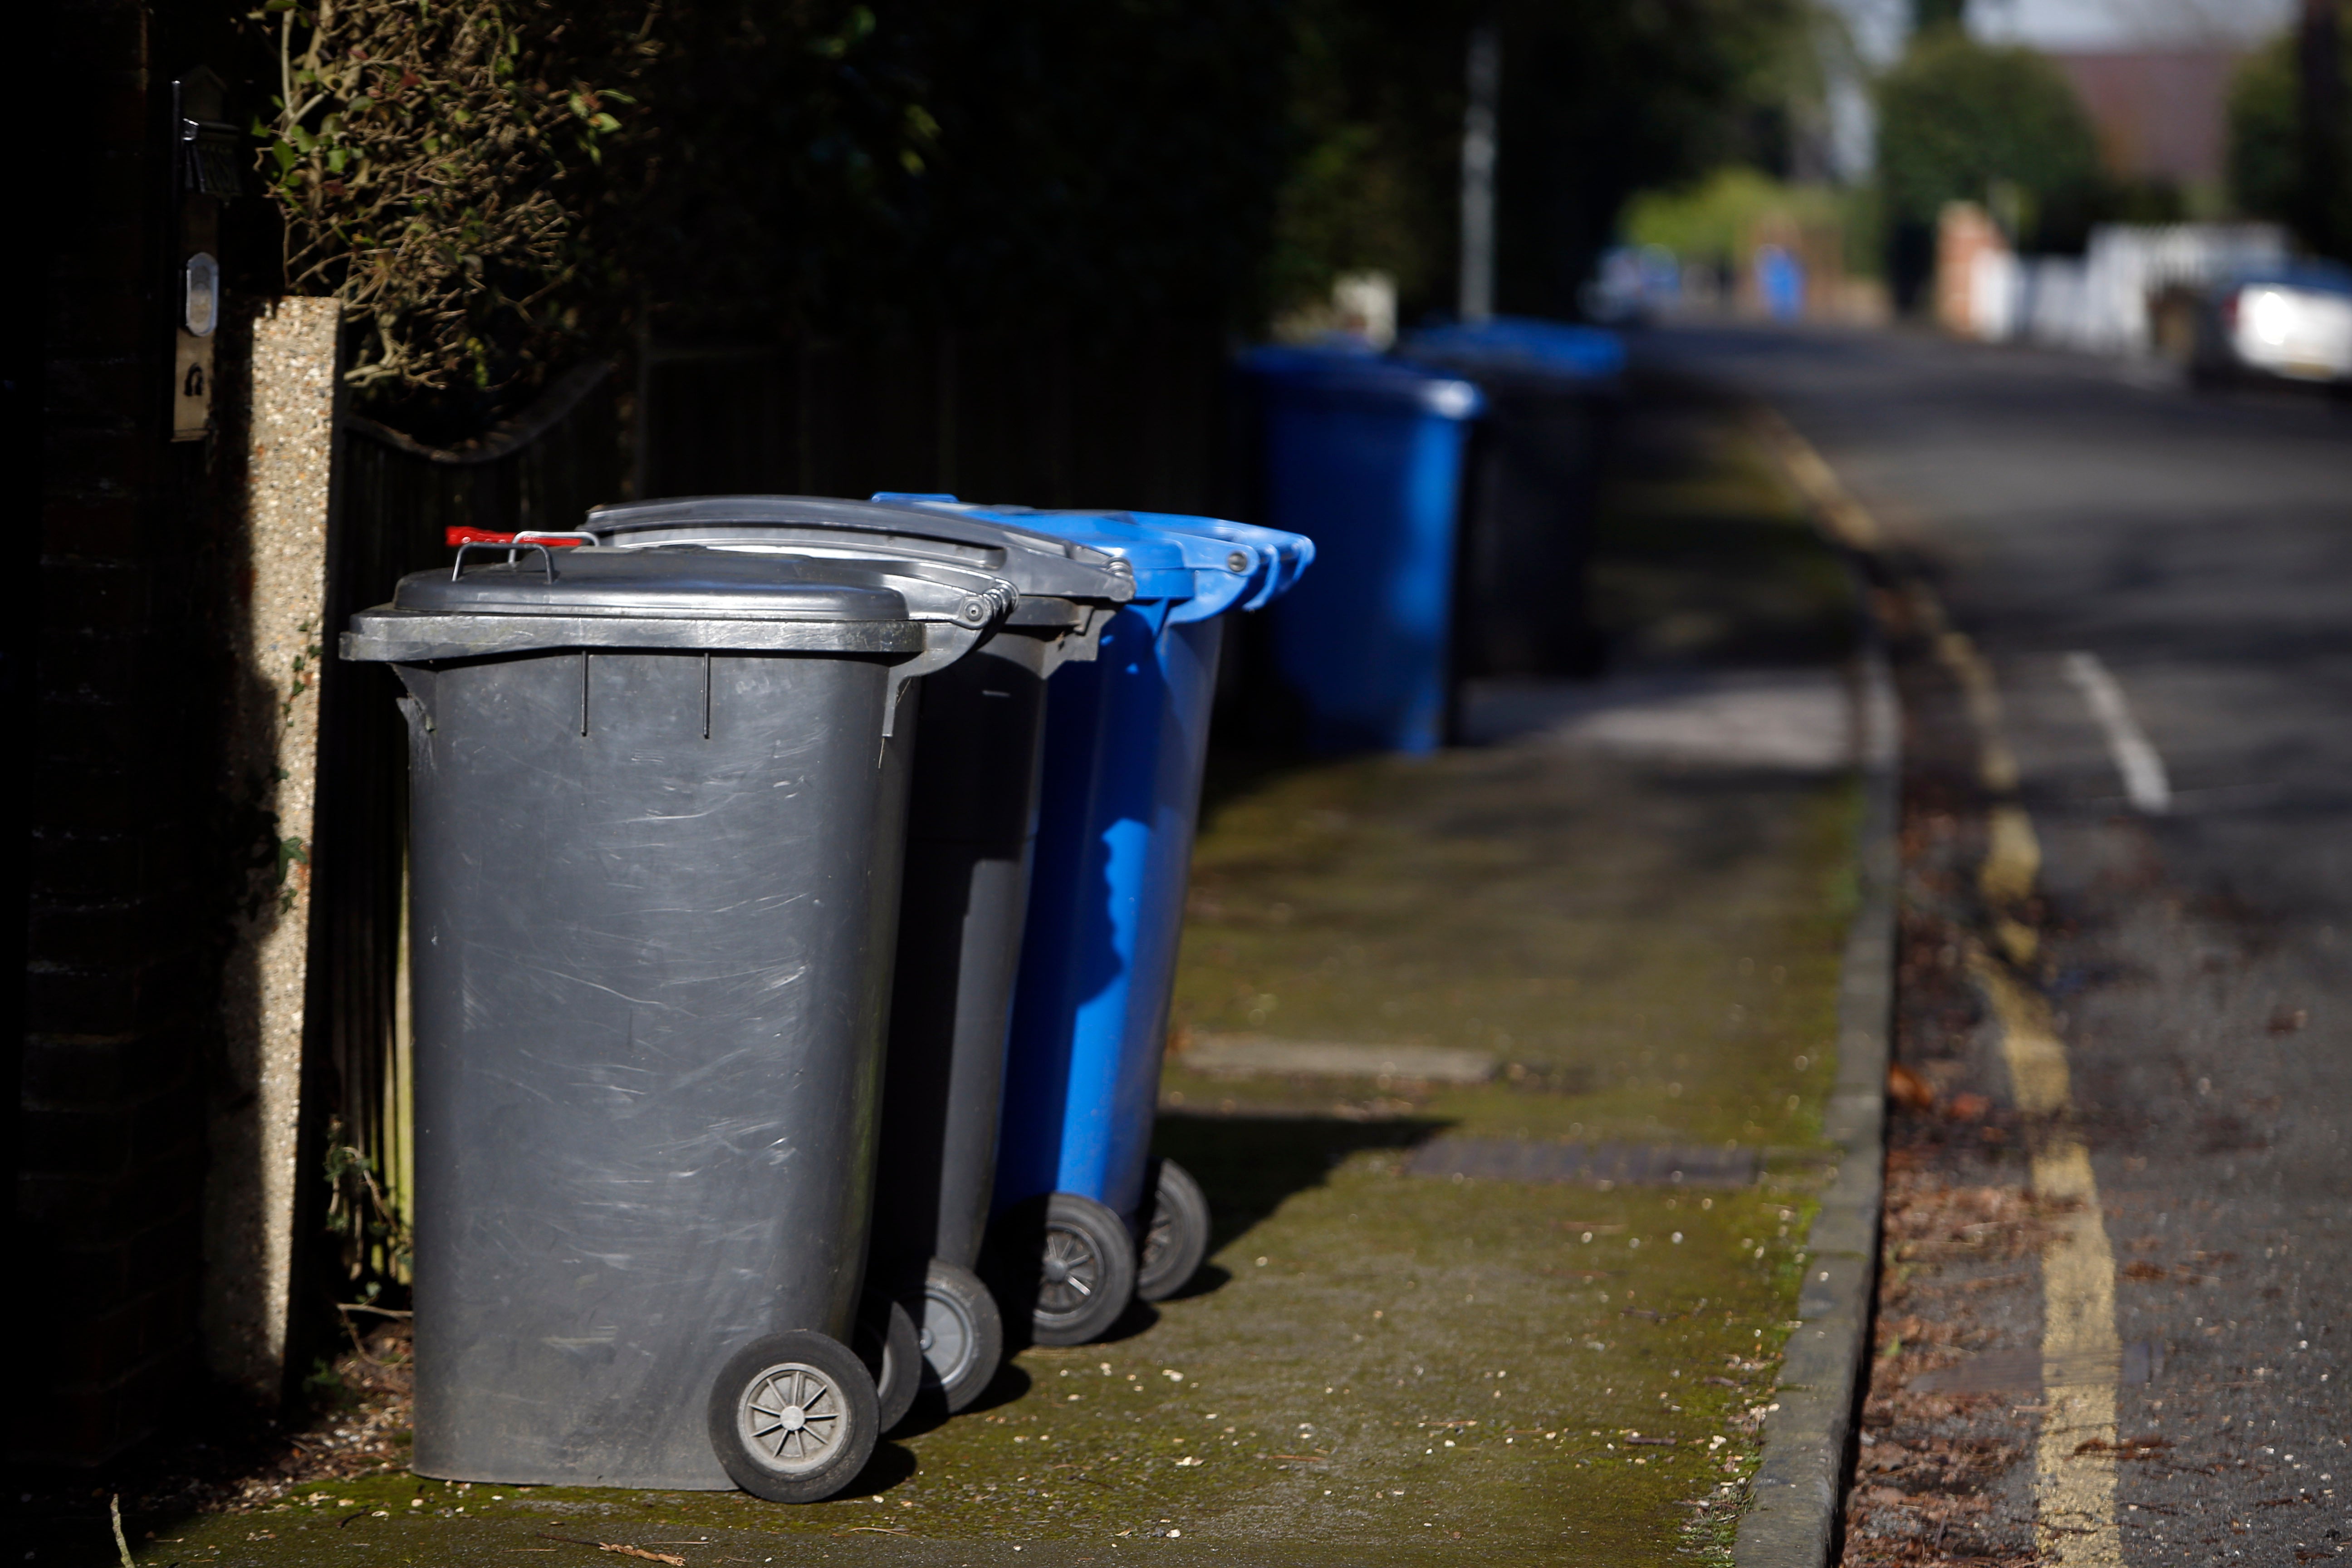 Councils are telling waste collectors to start and end shifts earlier so as to avoid peak sun